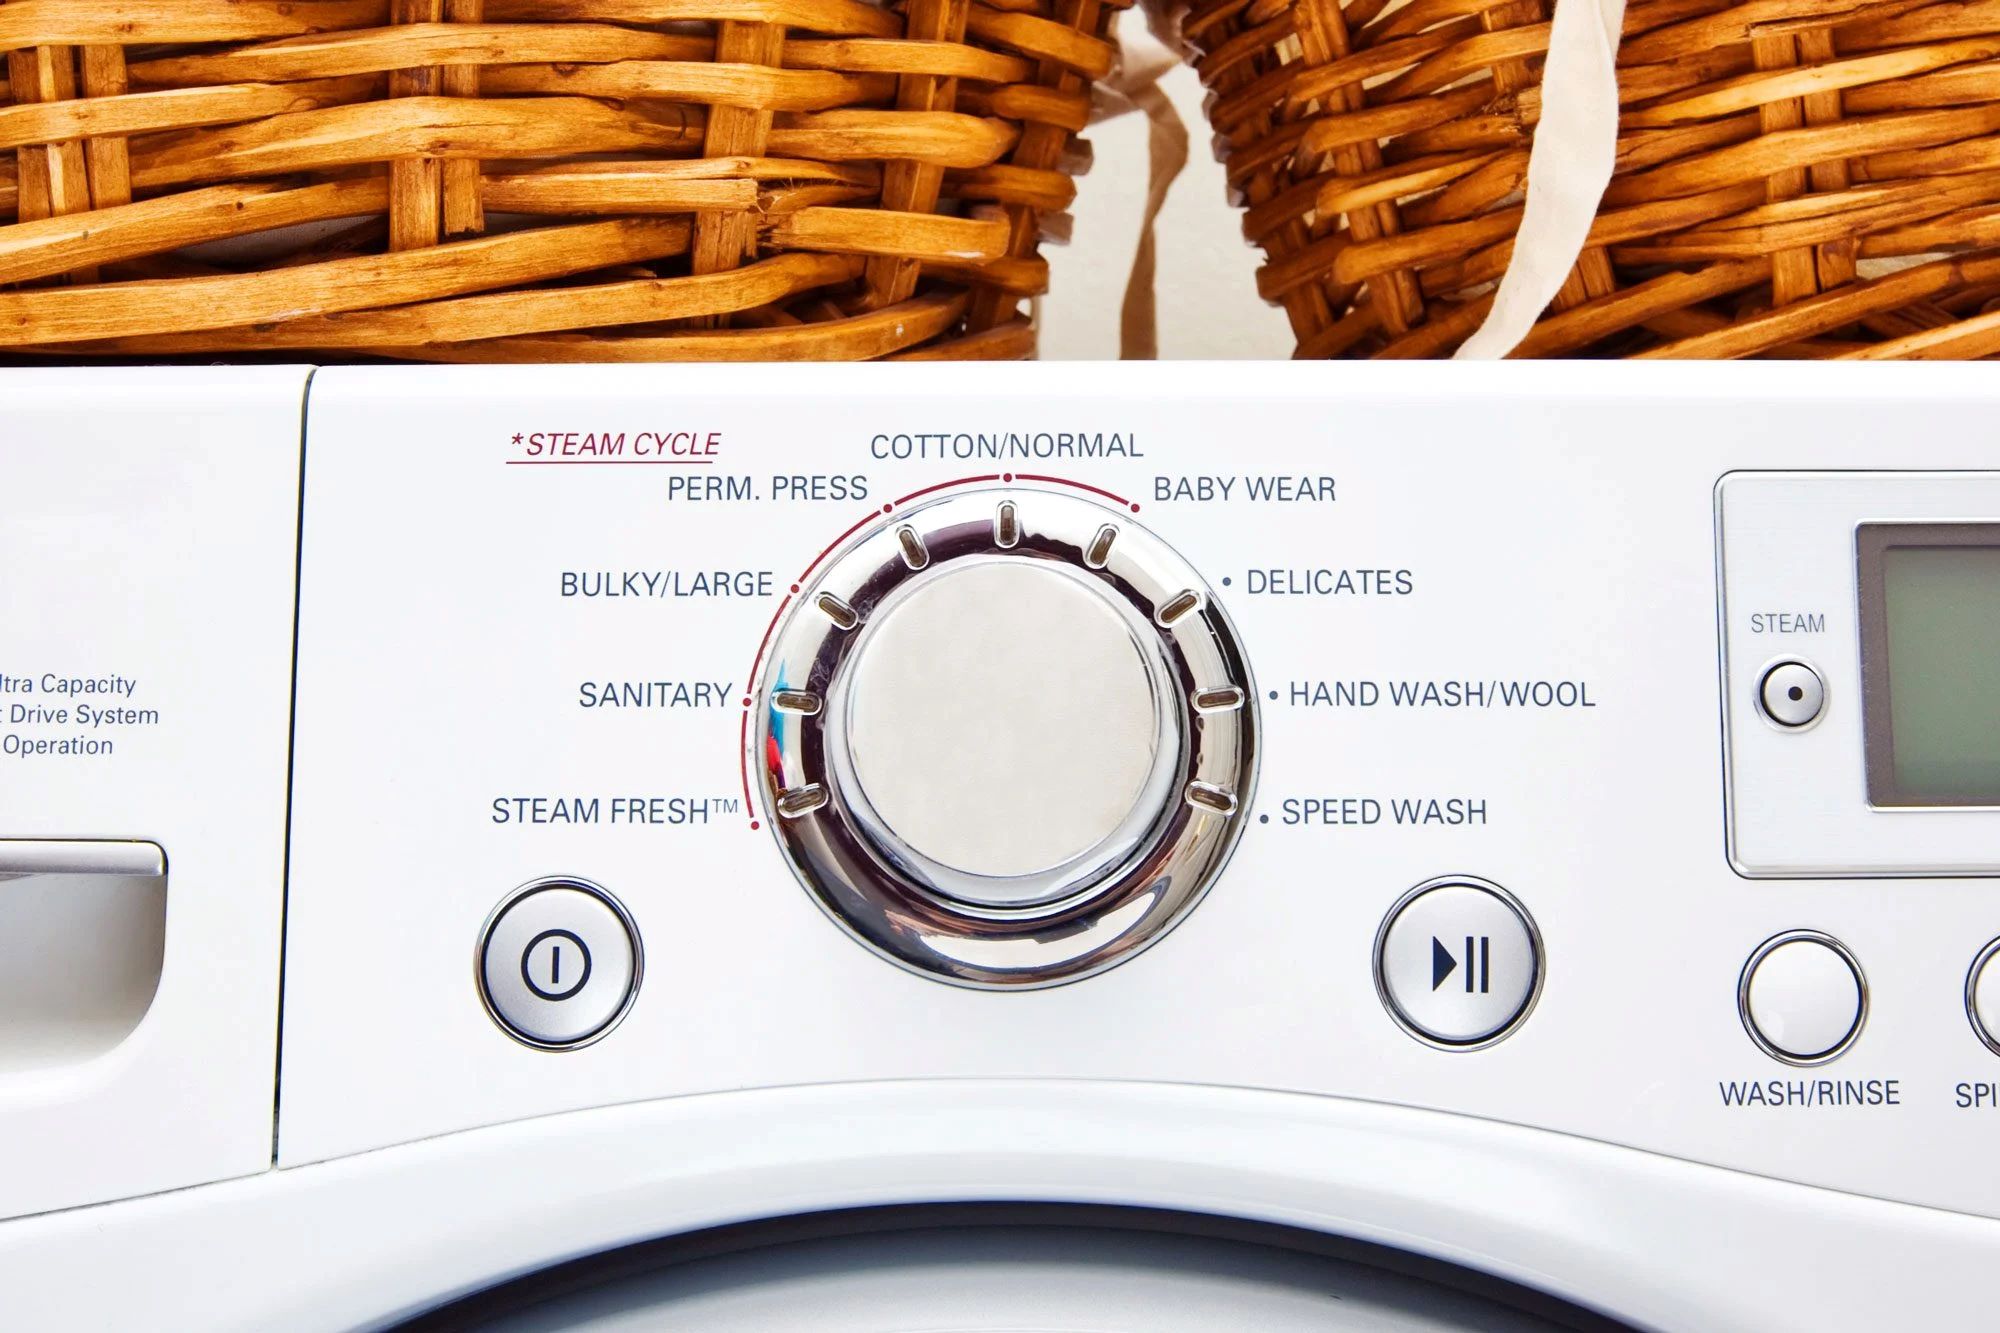 What Is Perm Press On A Washing Machine